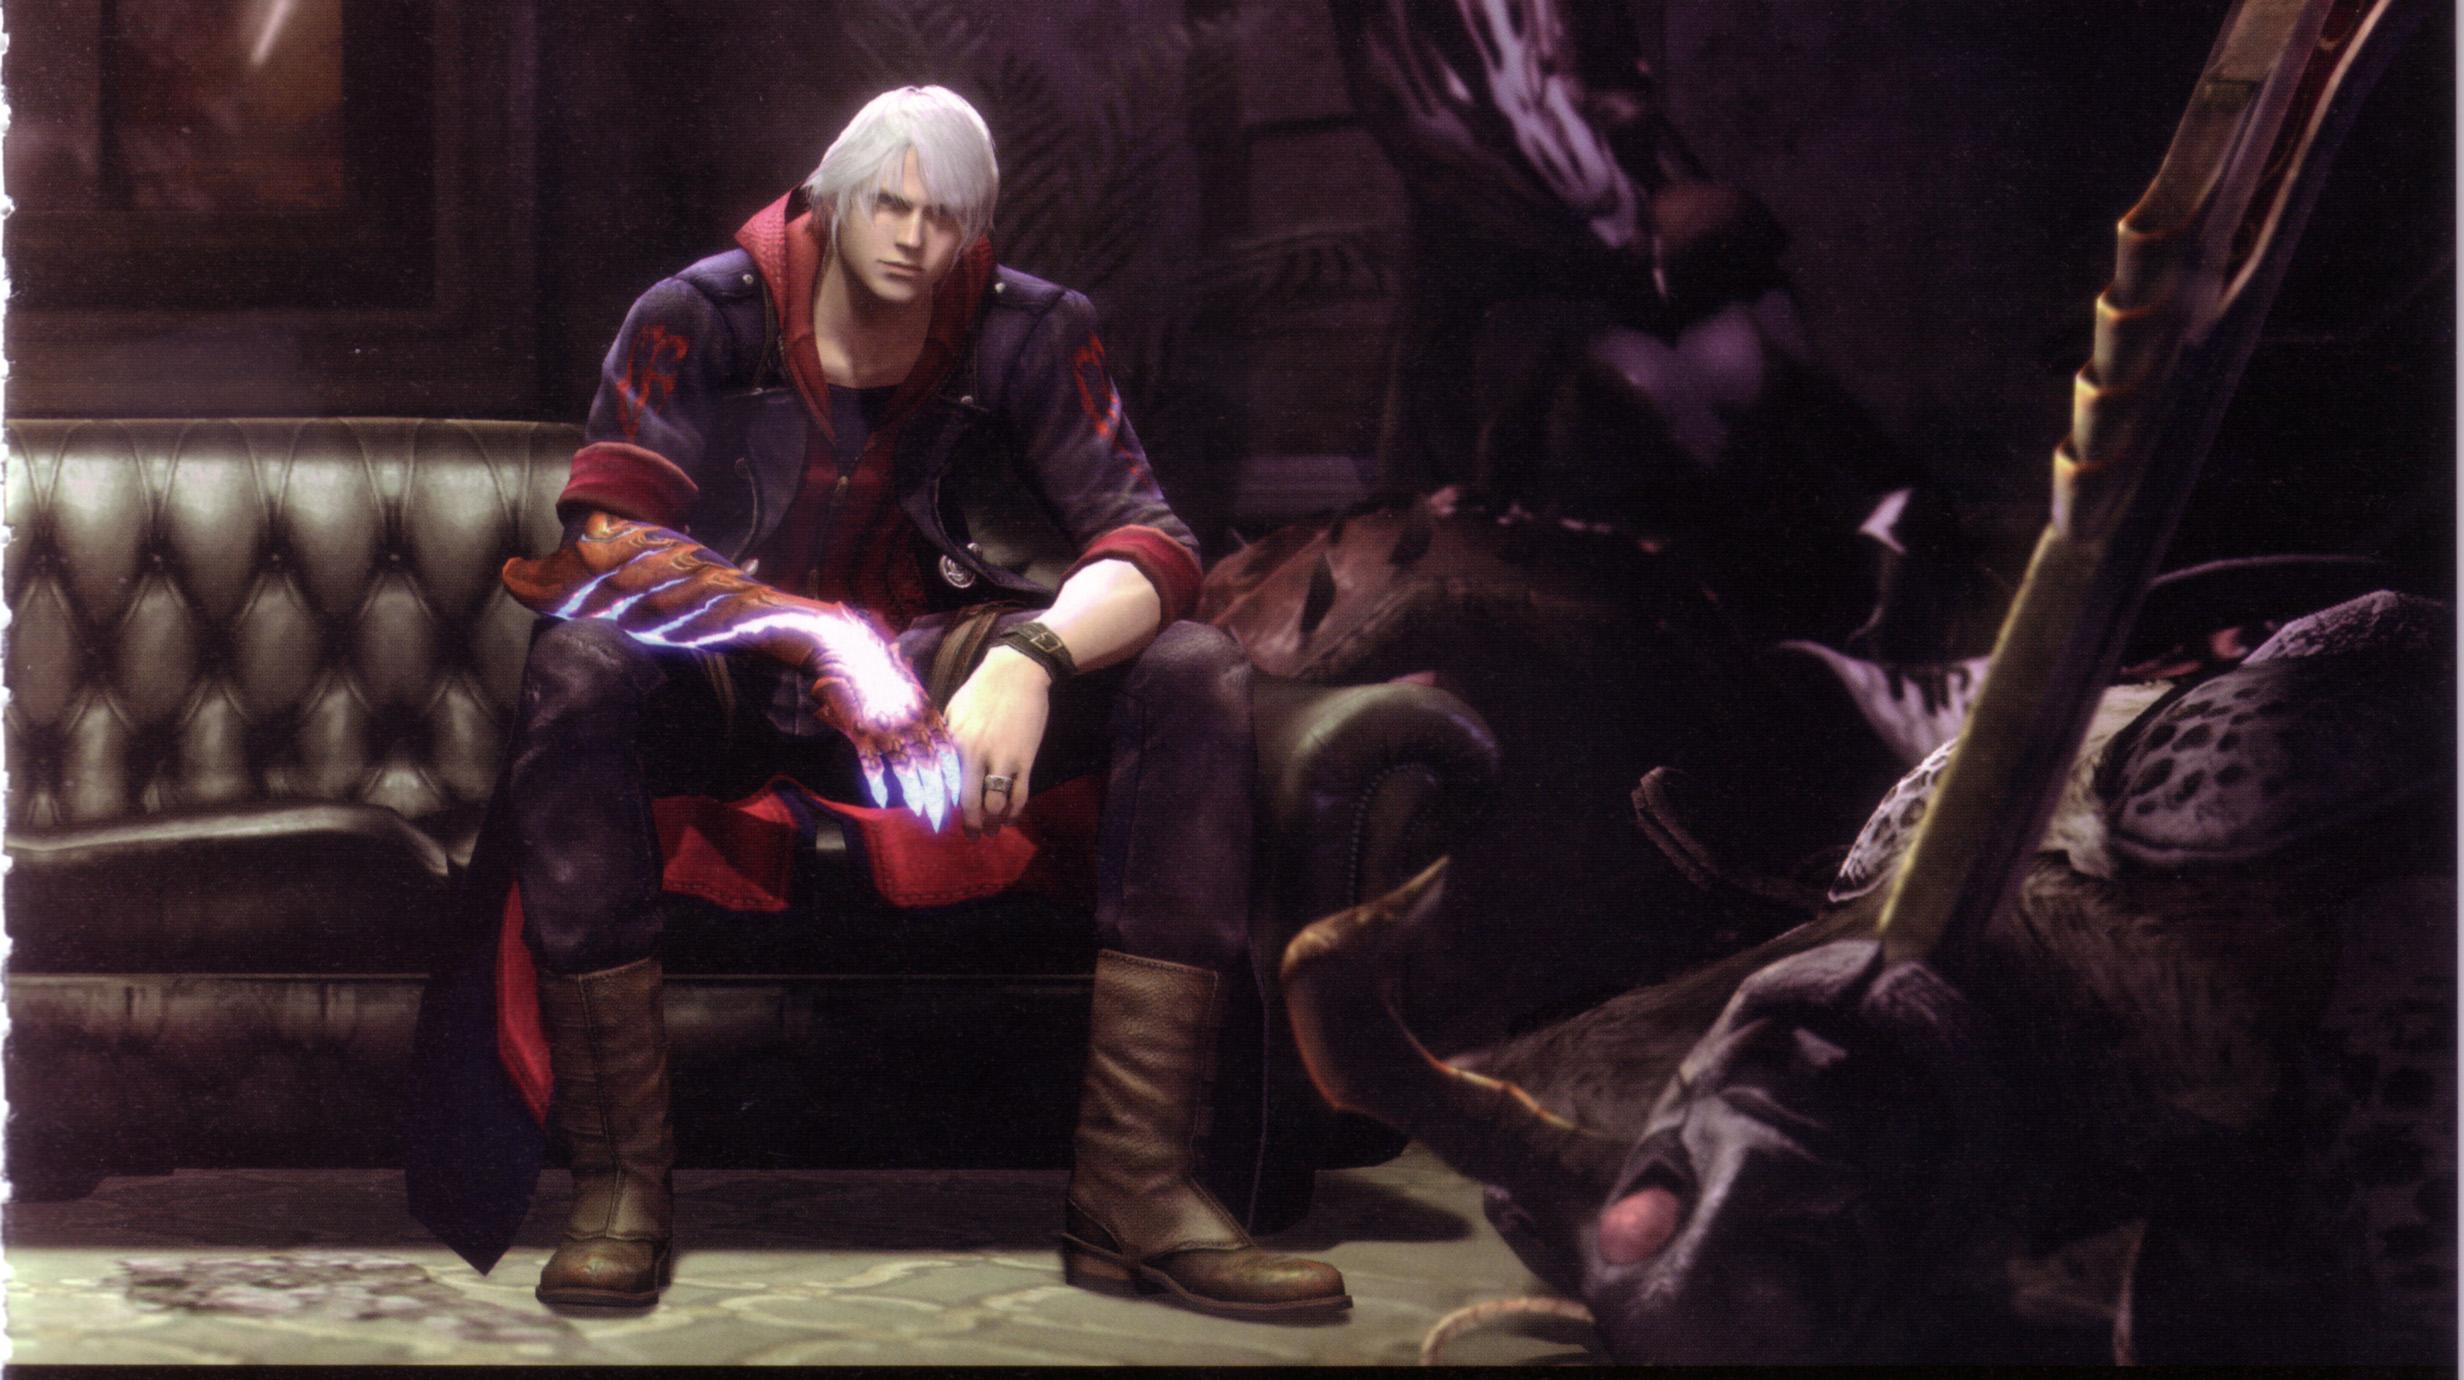 Devil may cry game. Данте ДМС 4. Неро ДМС 4. Devil May Cry 4 Данте. Devil May Cry 5.